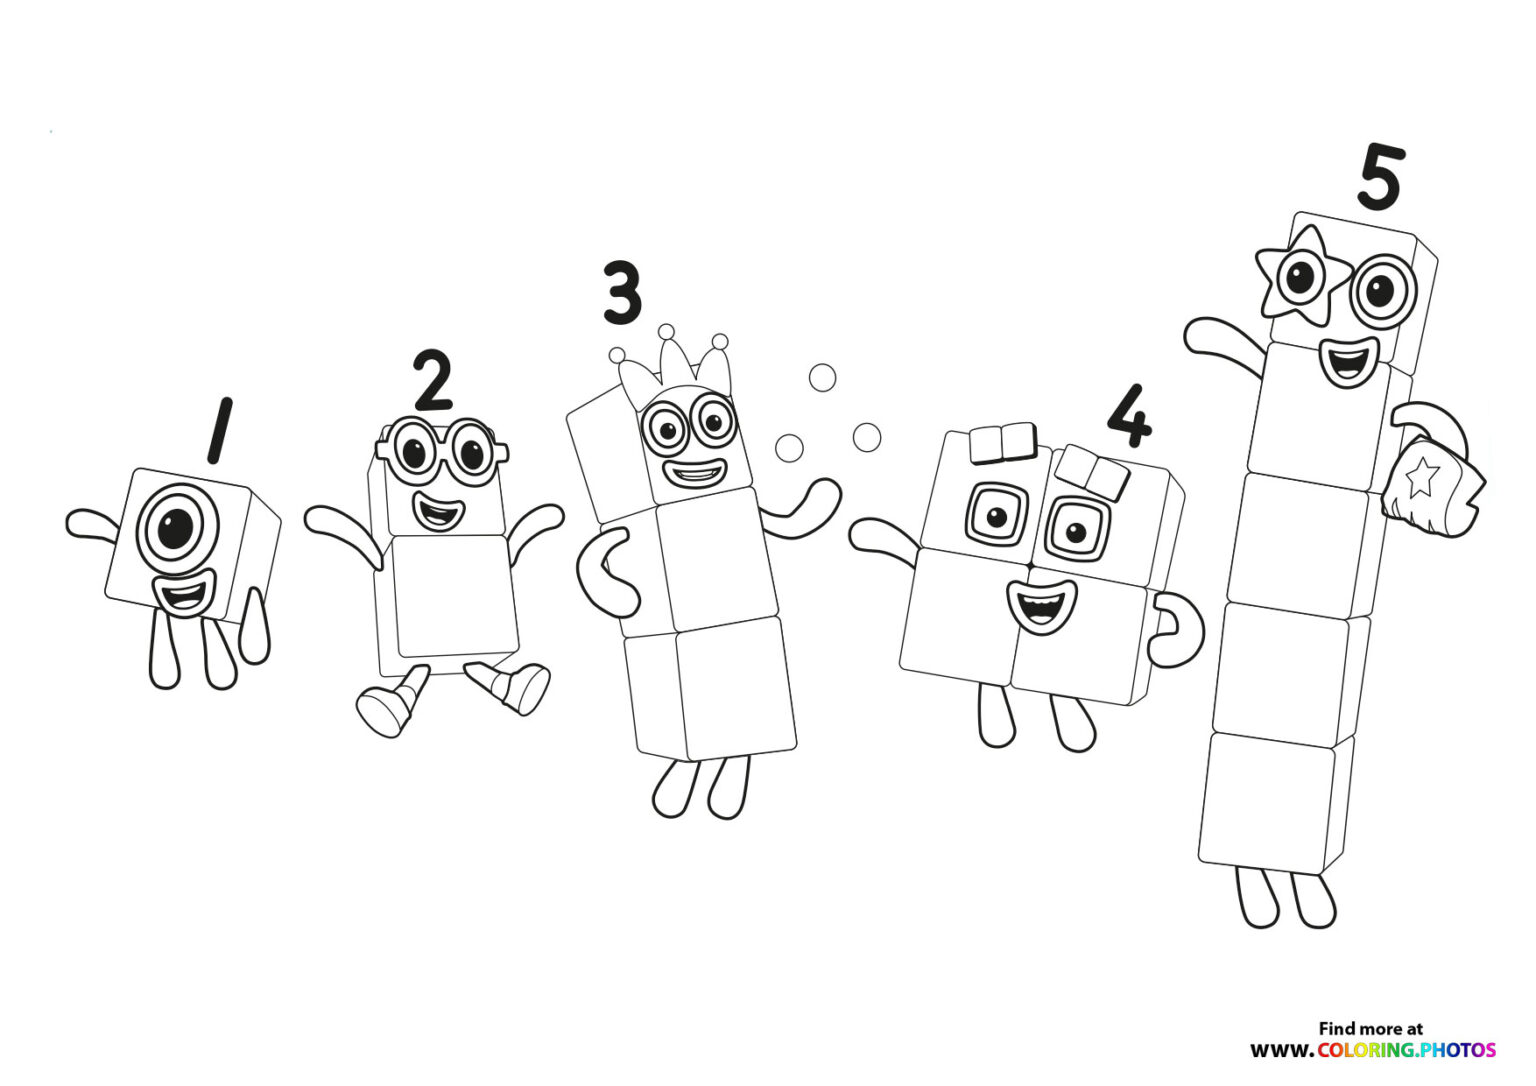 Numberblocks - Coloring Pages for kids